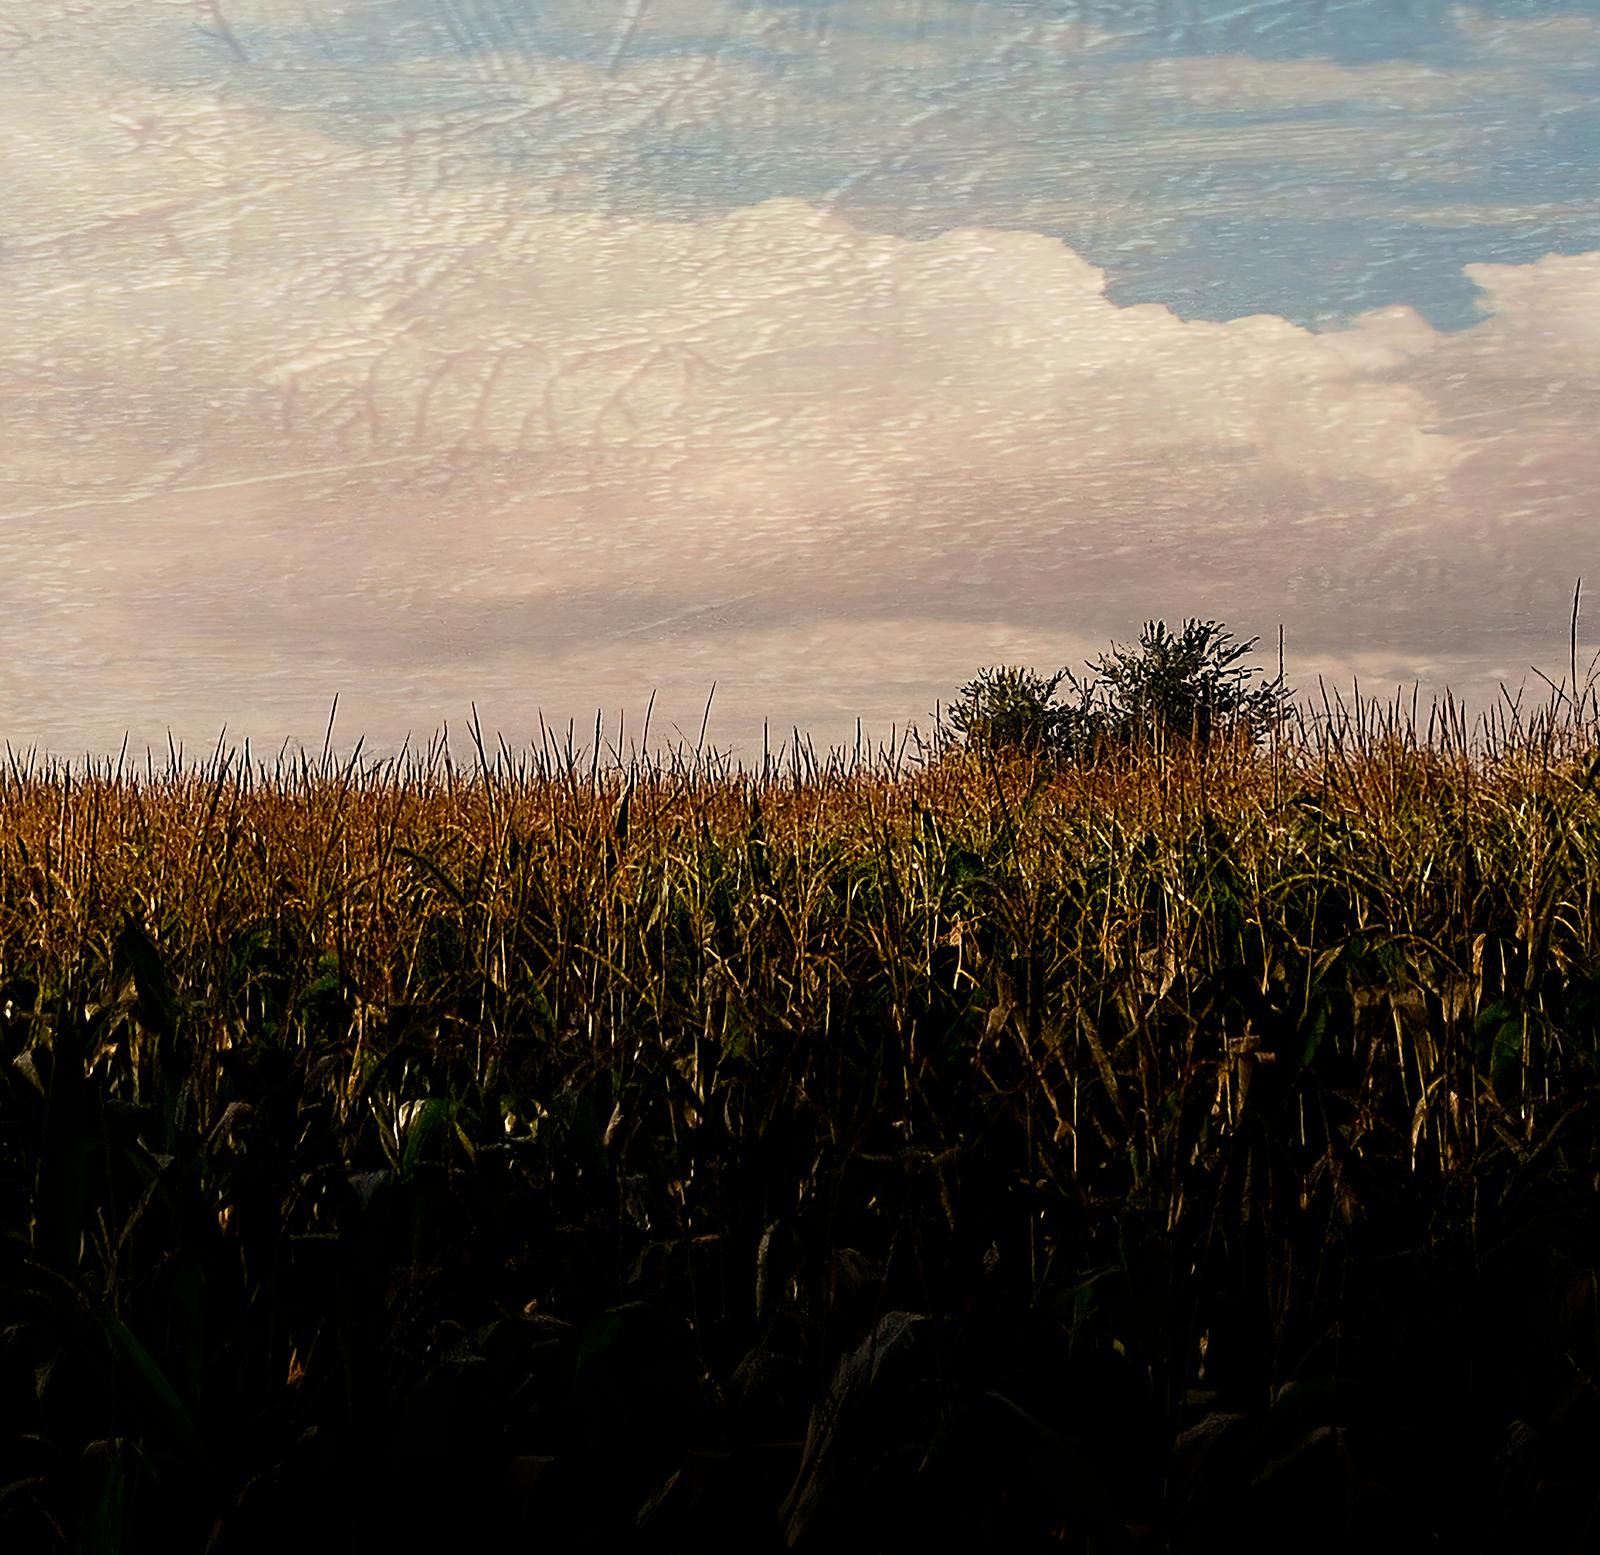 Plenitude - Signed limited edition archival pigment print, Edition of 5
Signed + numbered by artist with certificate of authenticity , unframed

Panoramic landscape of a cornfield treated as a painting
This is an Archival Pigment print on fiber